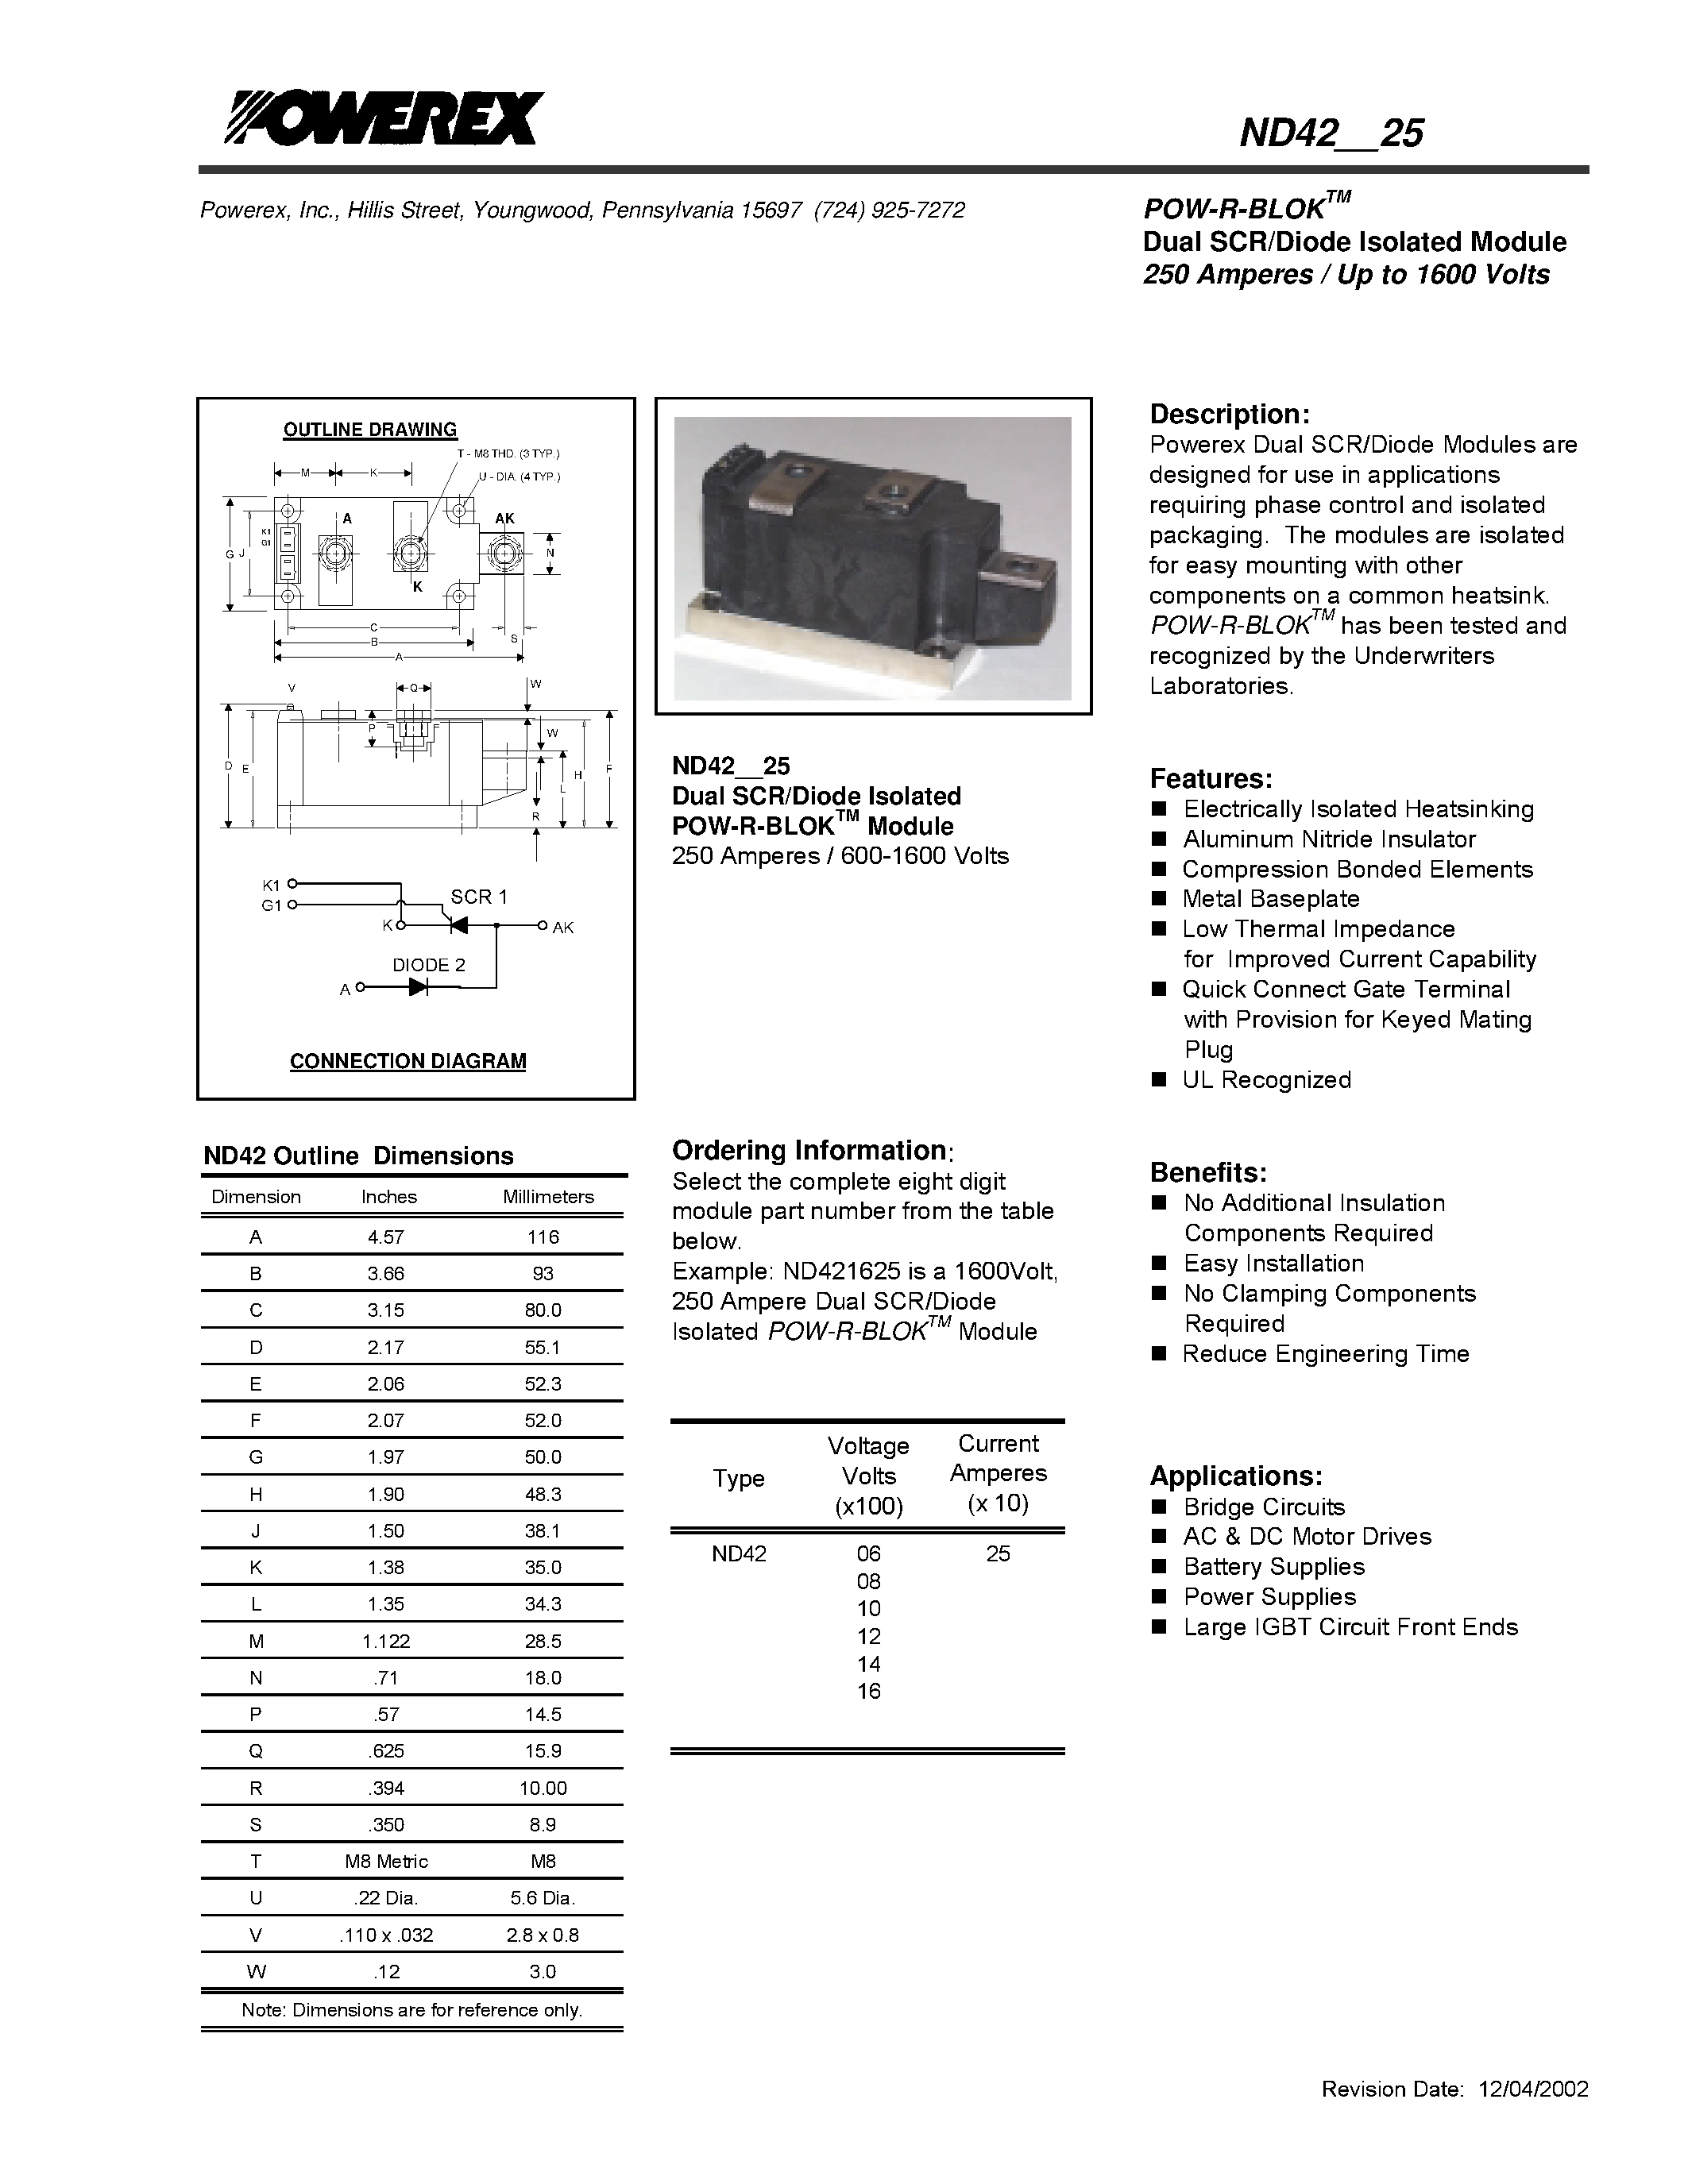 Datasheet ND421425 - POW-R-BLOK Dual SCR/Diode Isolated Module (250 Amperes / Up to 1600 Volts) page 1